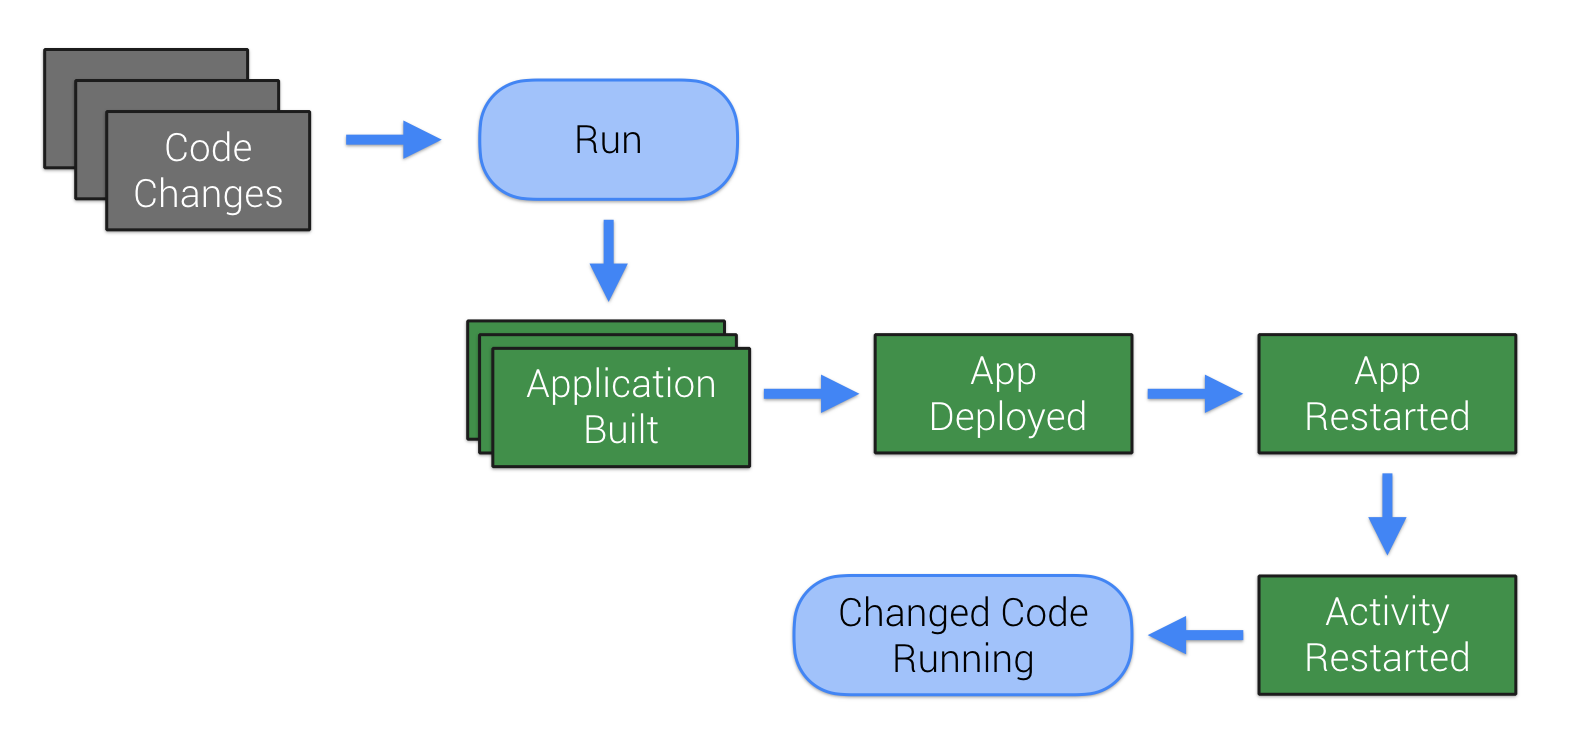 Instant Run How Does It Work An Android Tool Time Deep Dive By Reto Meier Google Developers Medium